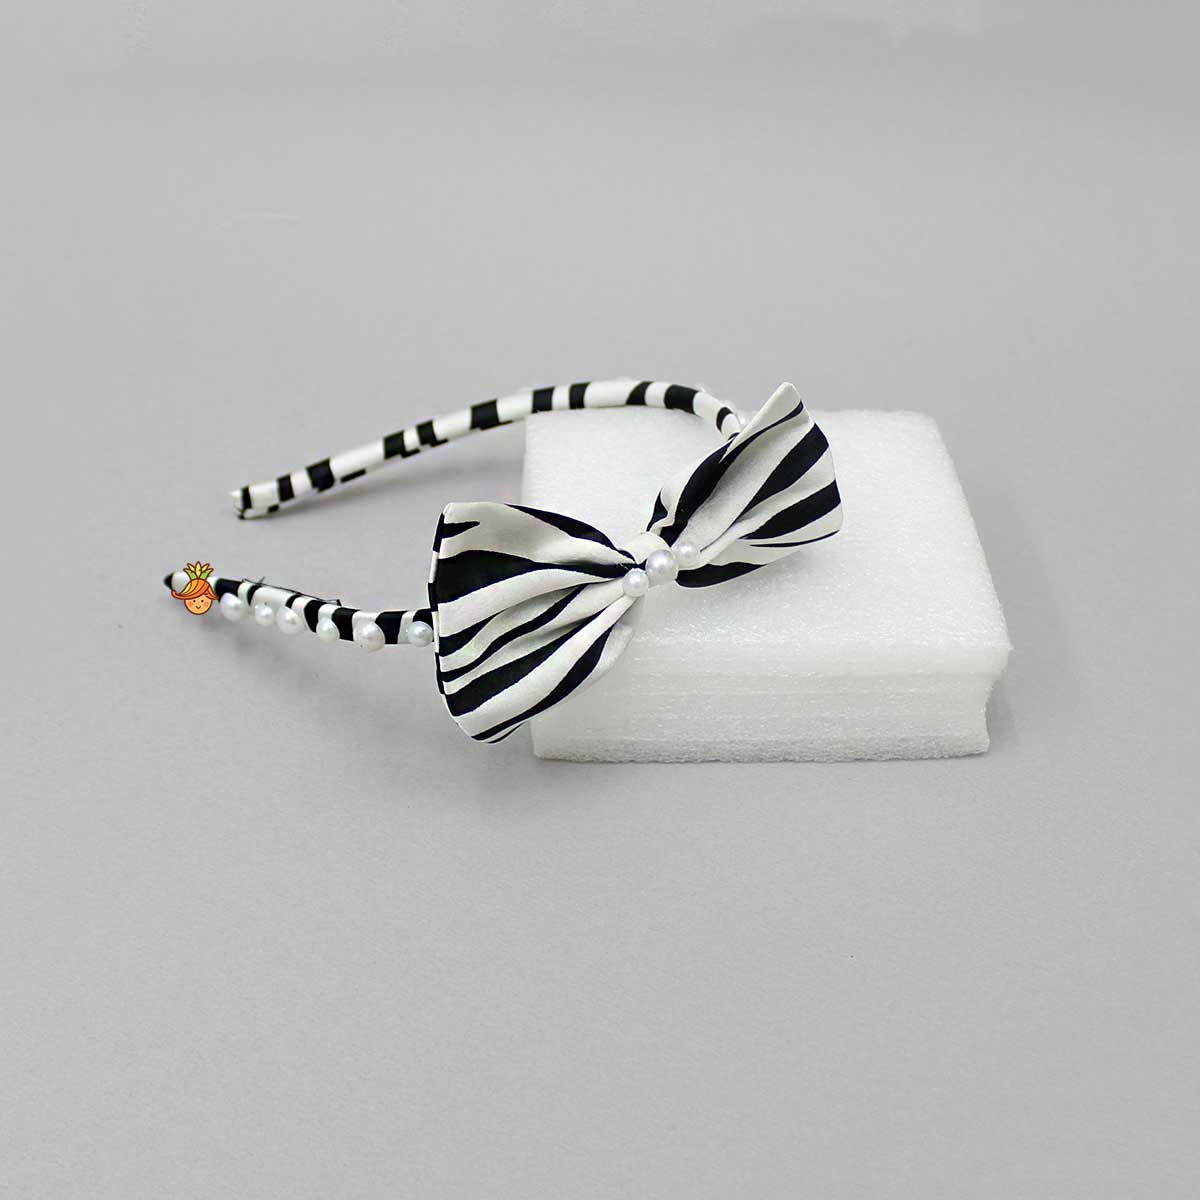 Exquisite Black And White Bowie Hairband